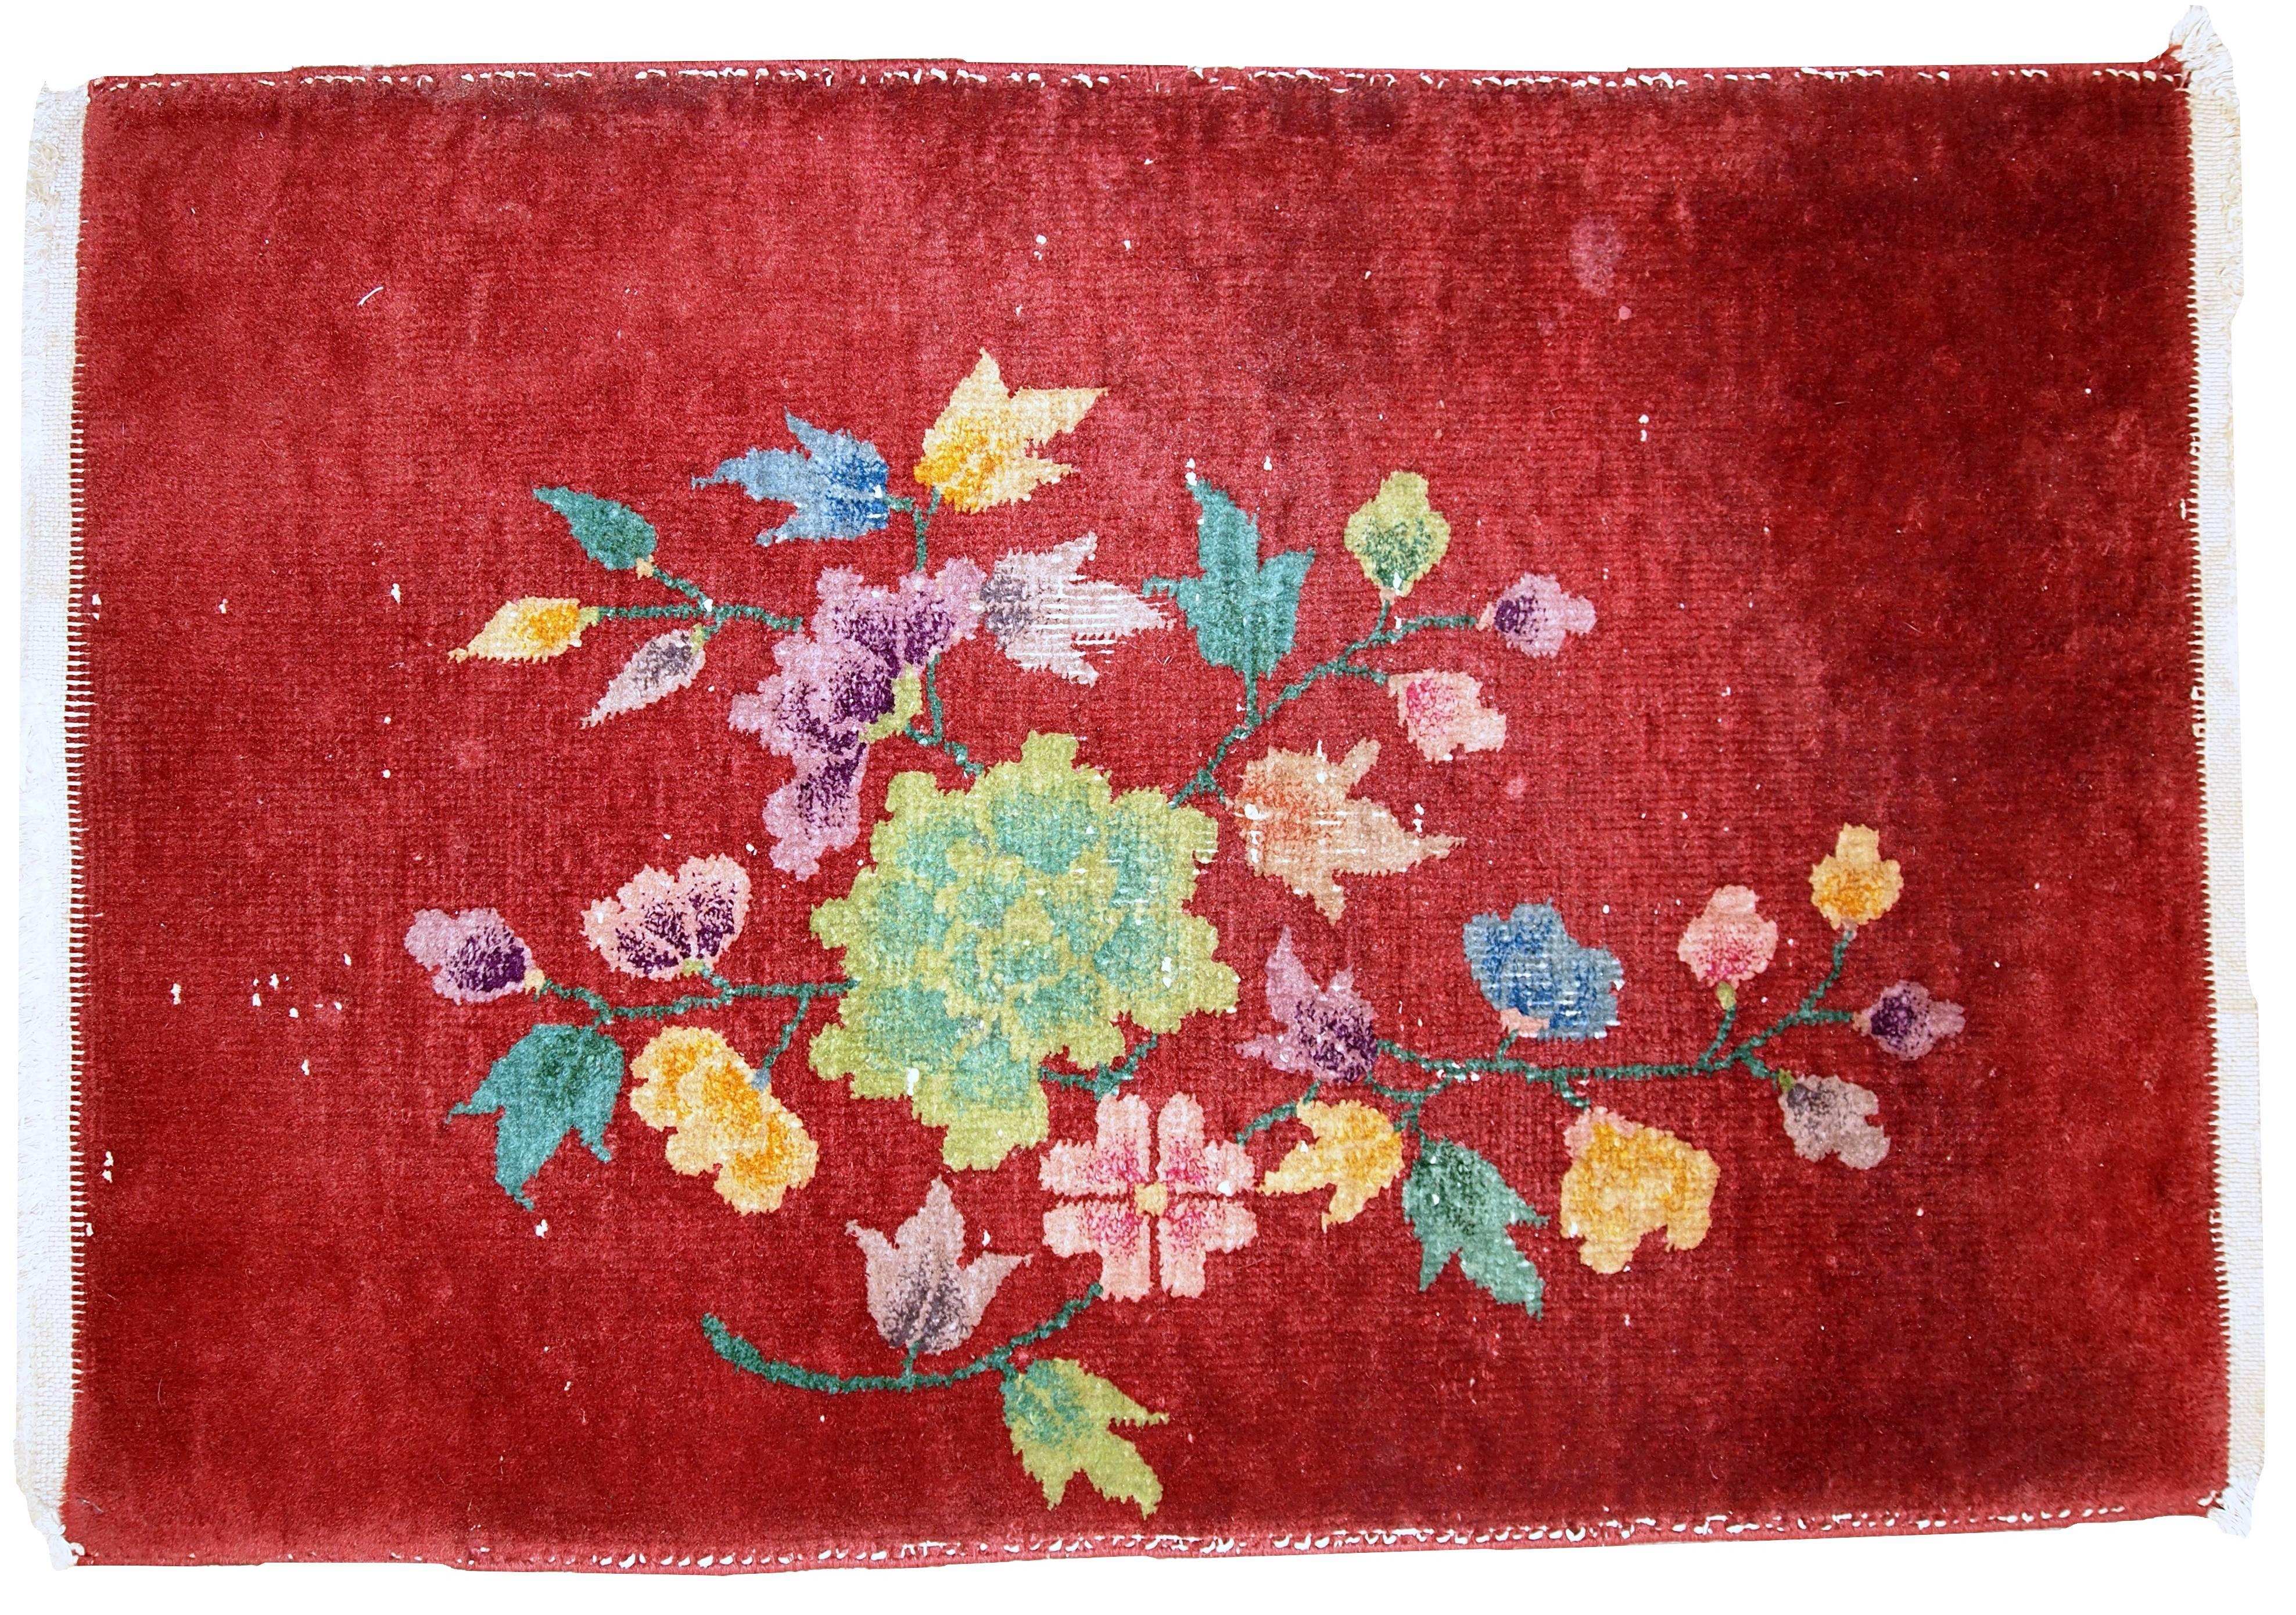 Antique Art Deco Chinese rug in original condition. The rug is in bright orange color. Decorative floral design in different shades or yellow, green and purple. The condition is original, has some low pile.